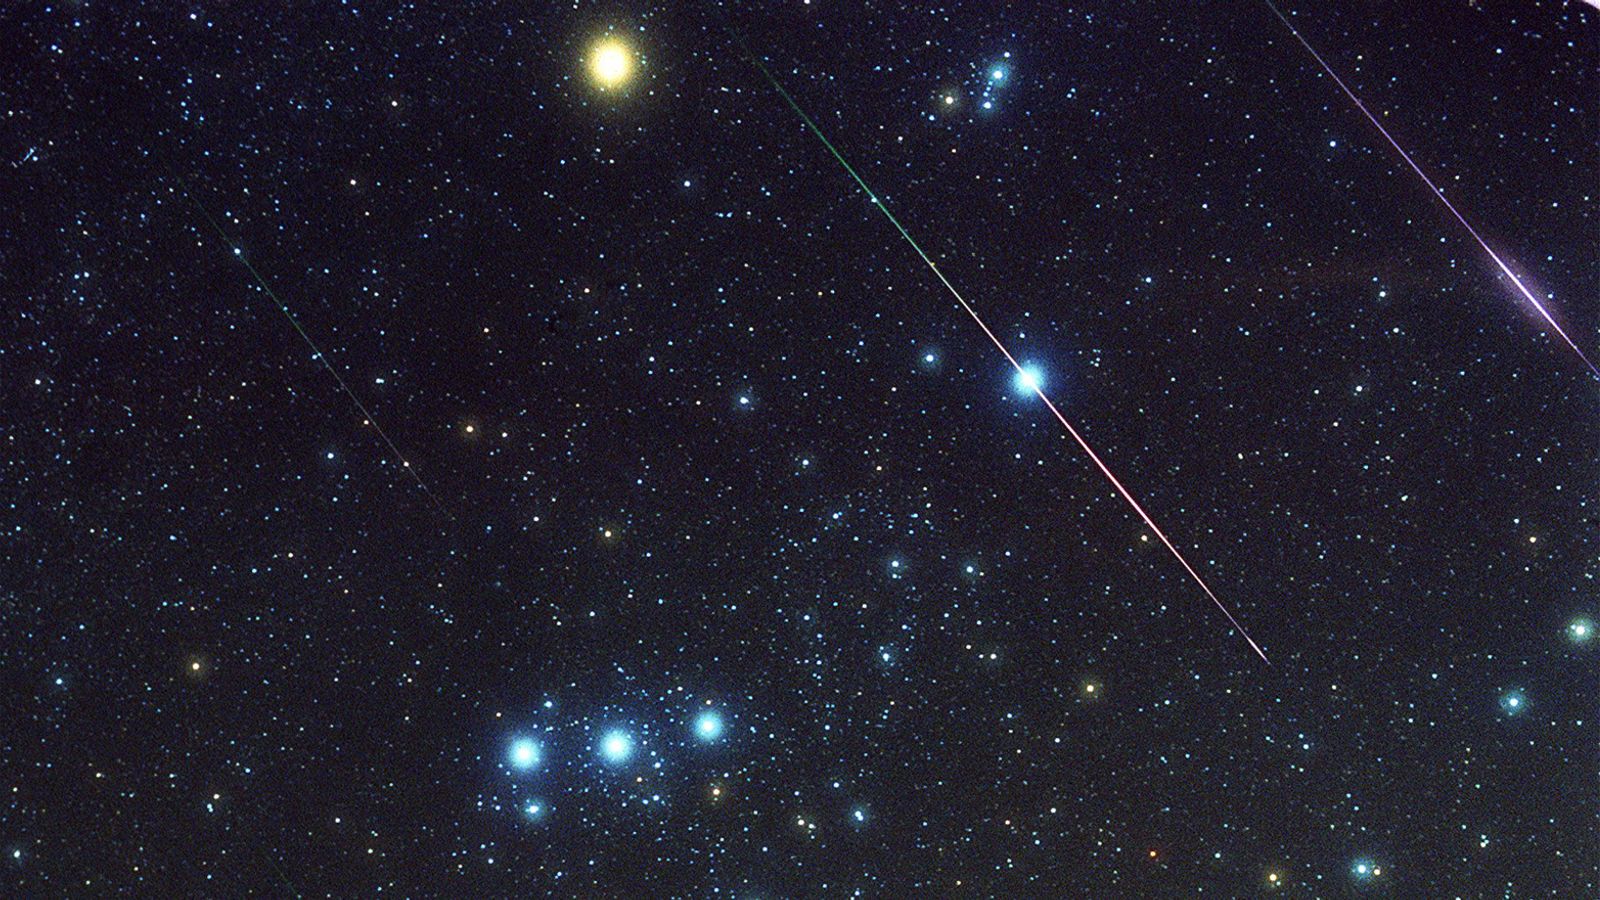 Leonid meteor shower to light up UK sky tonight - here's how and when you can see it